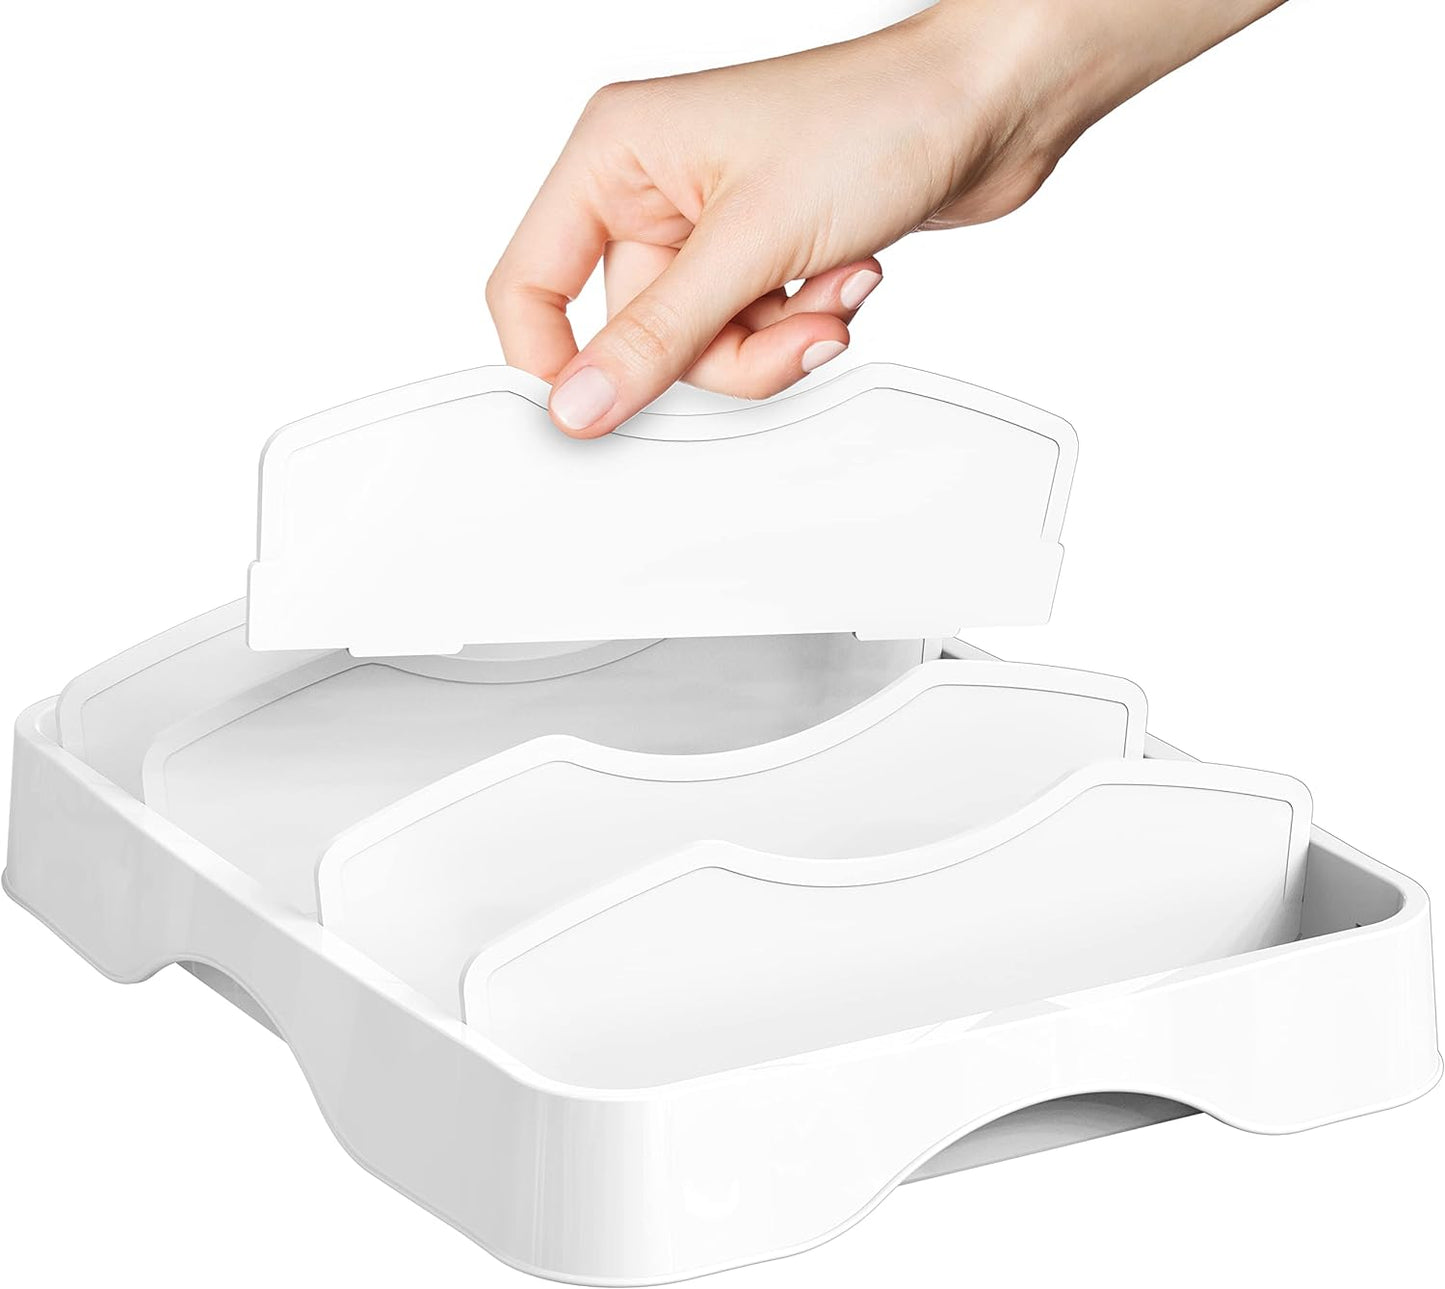 Neatly Organized: SimpleHouseware Adjustable Food Container Lid Organizer, 13''x10'', White